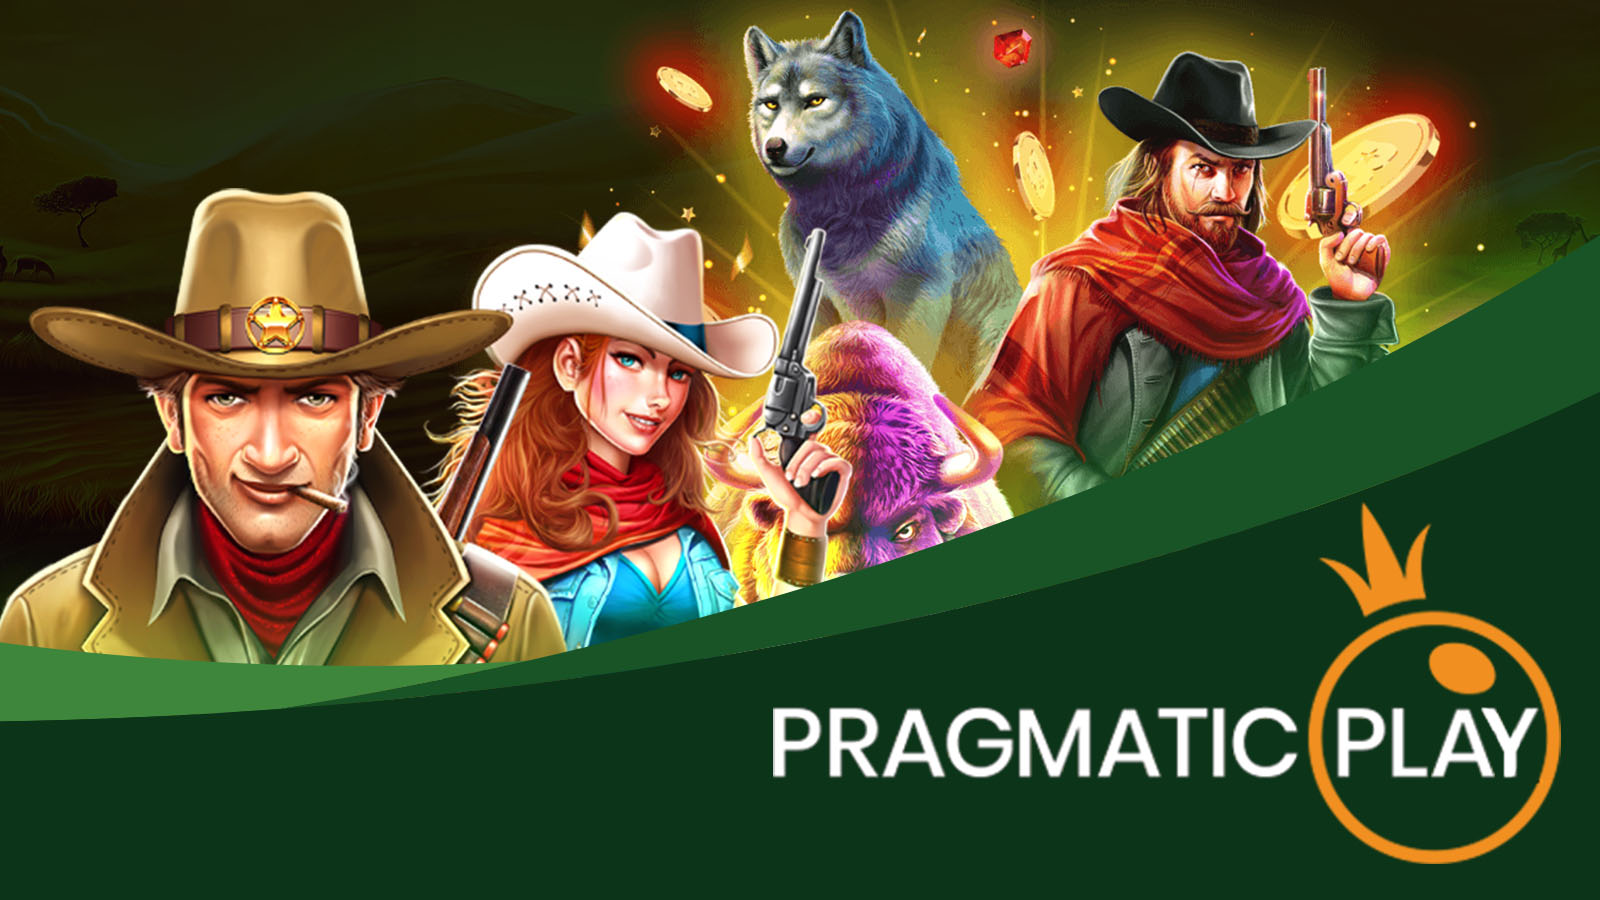 Pragmatic Play Overview